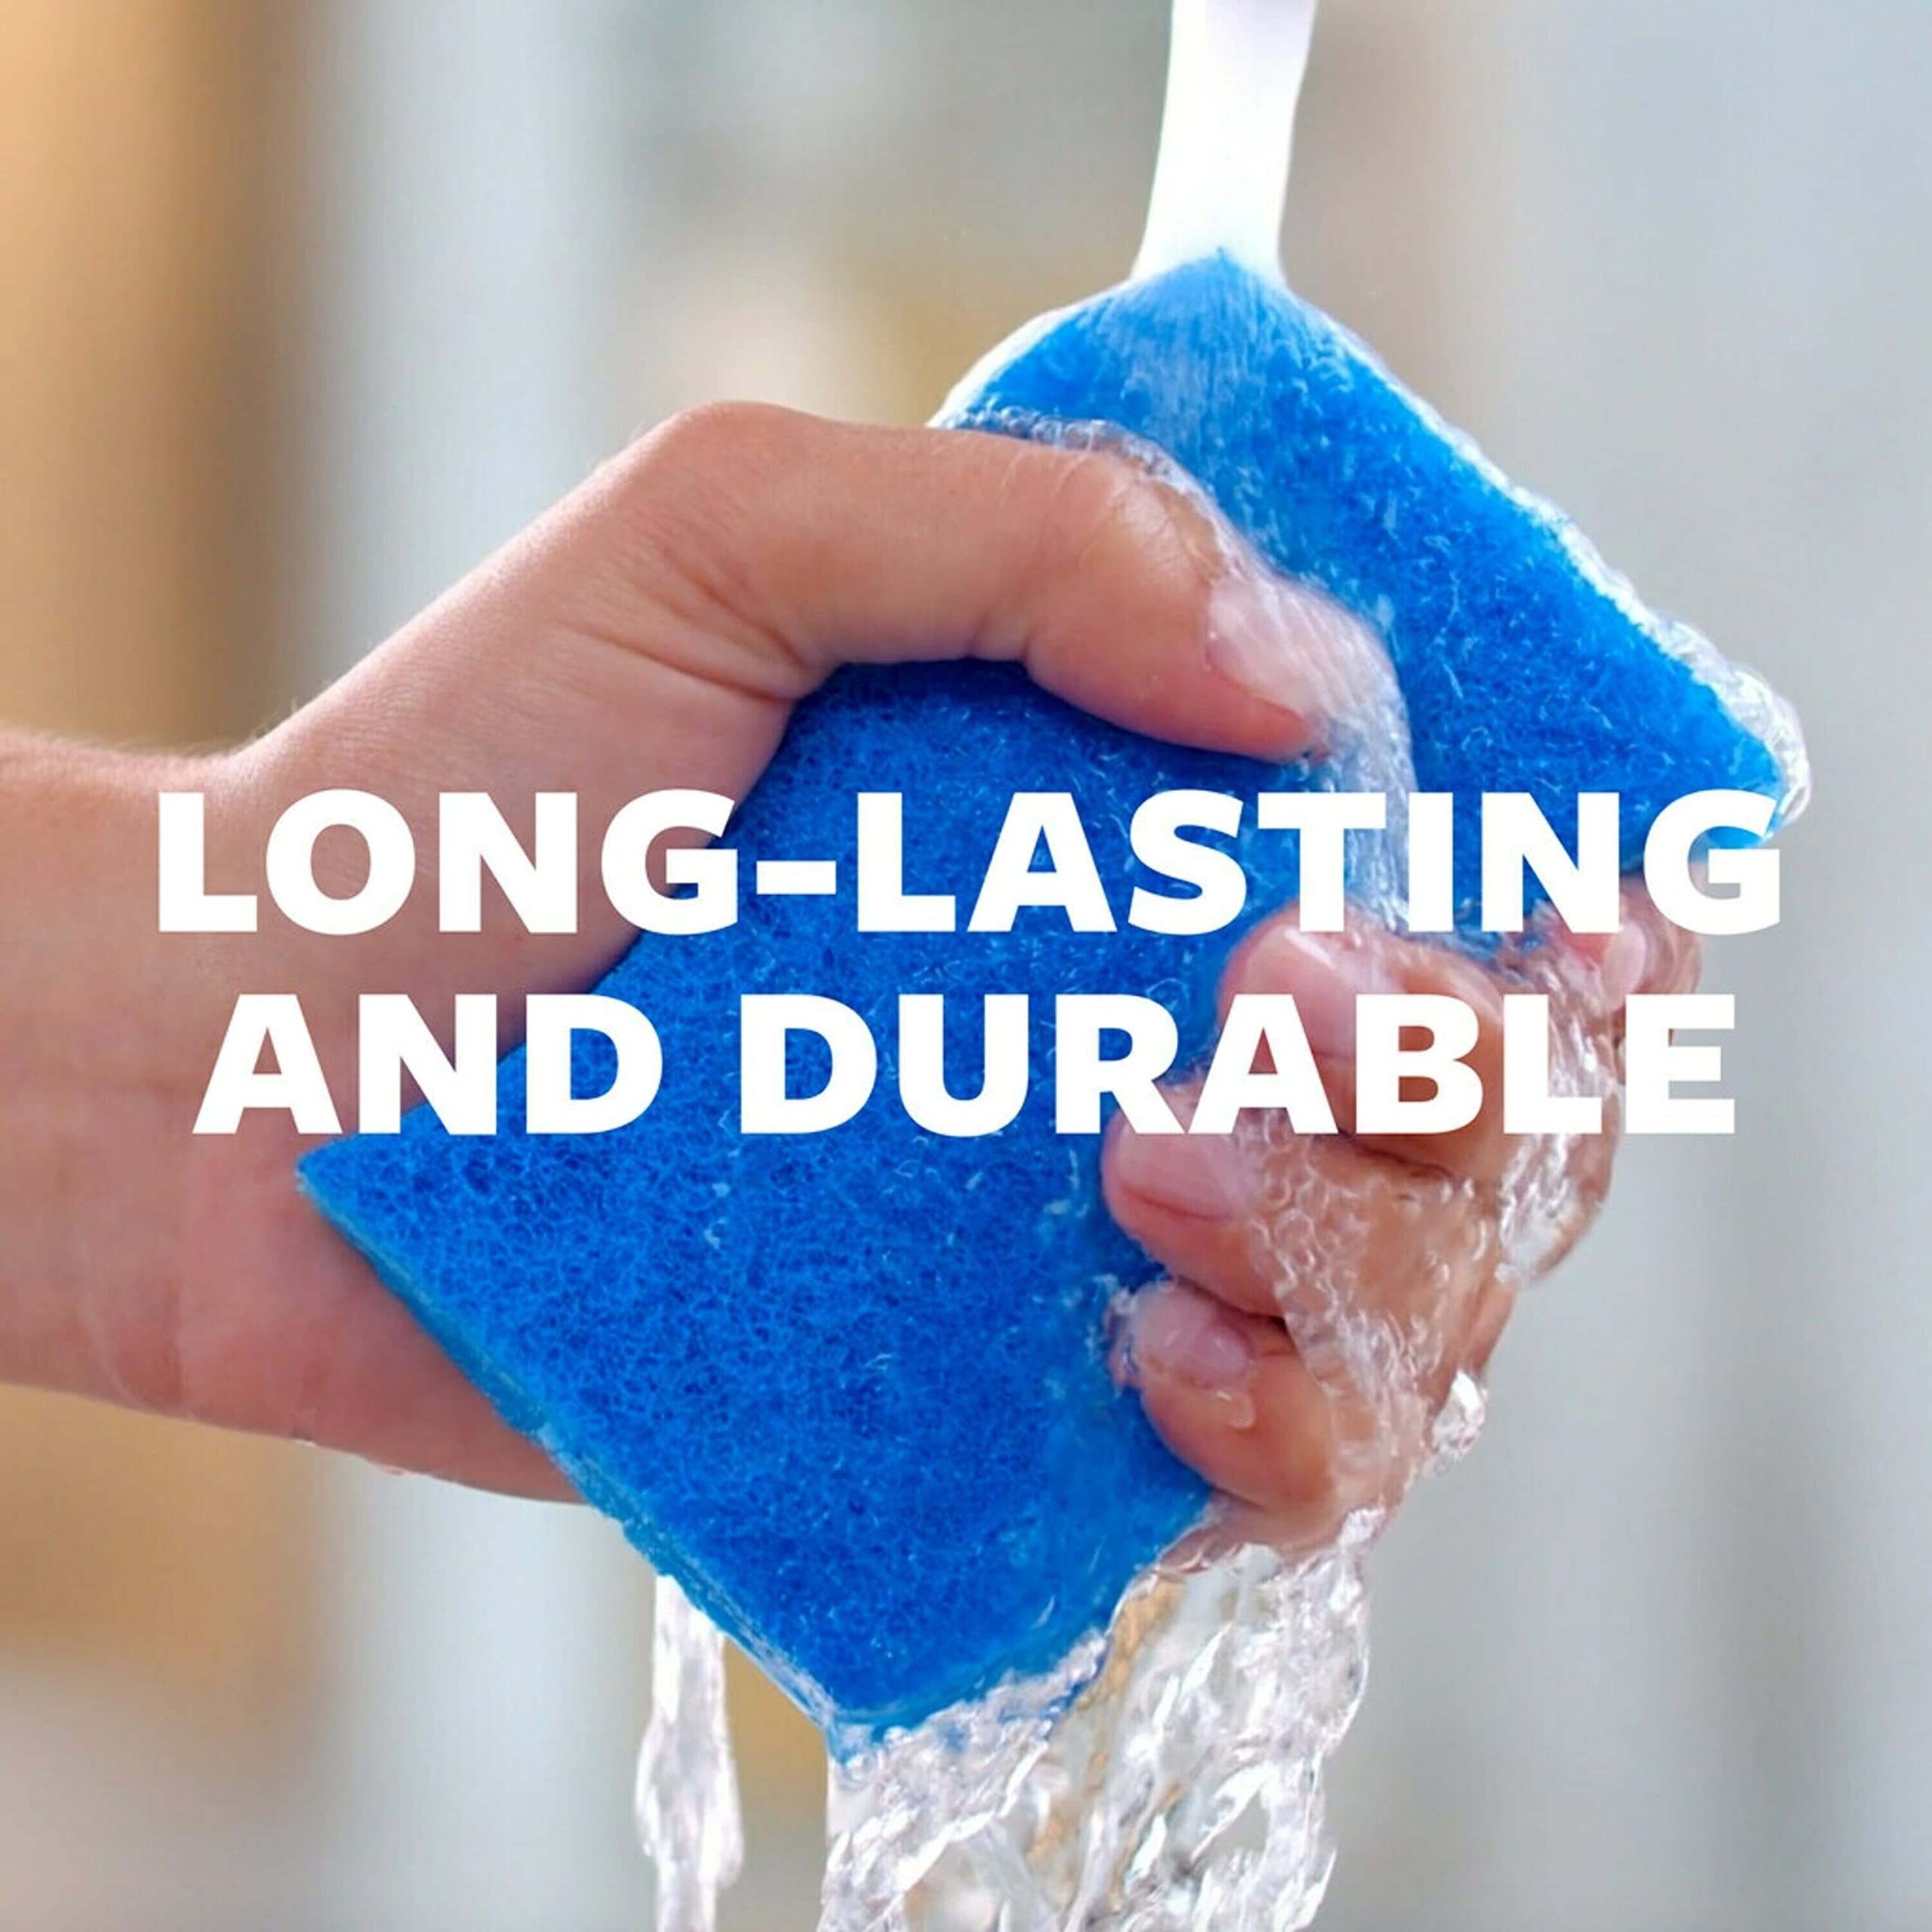 Non scratch Scrub Sponges Safe And Versatile Cleaning For - Temu